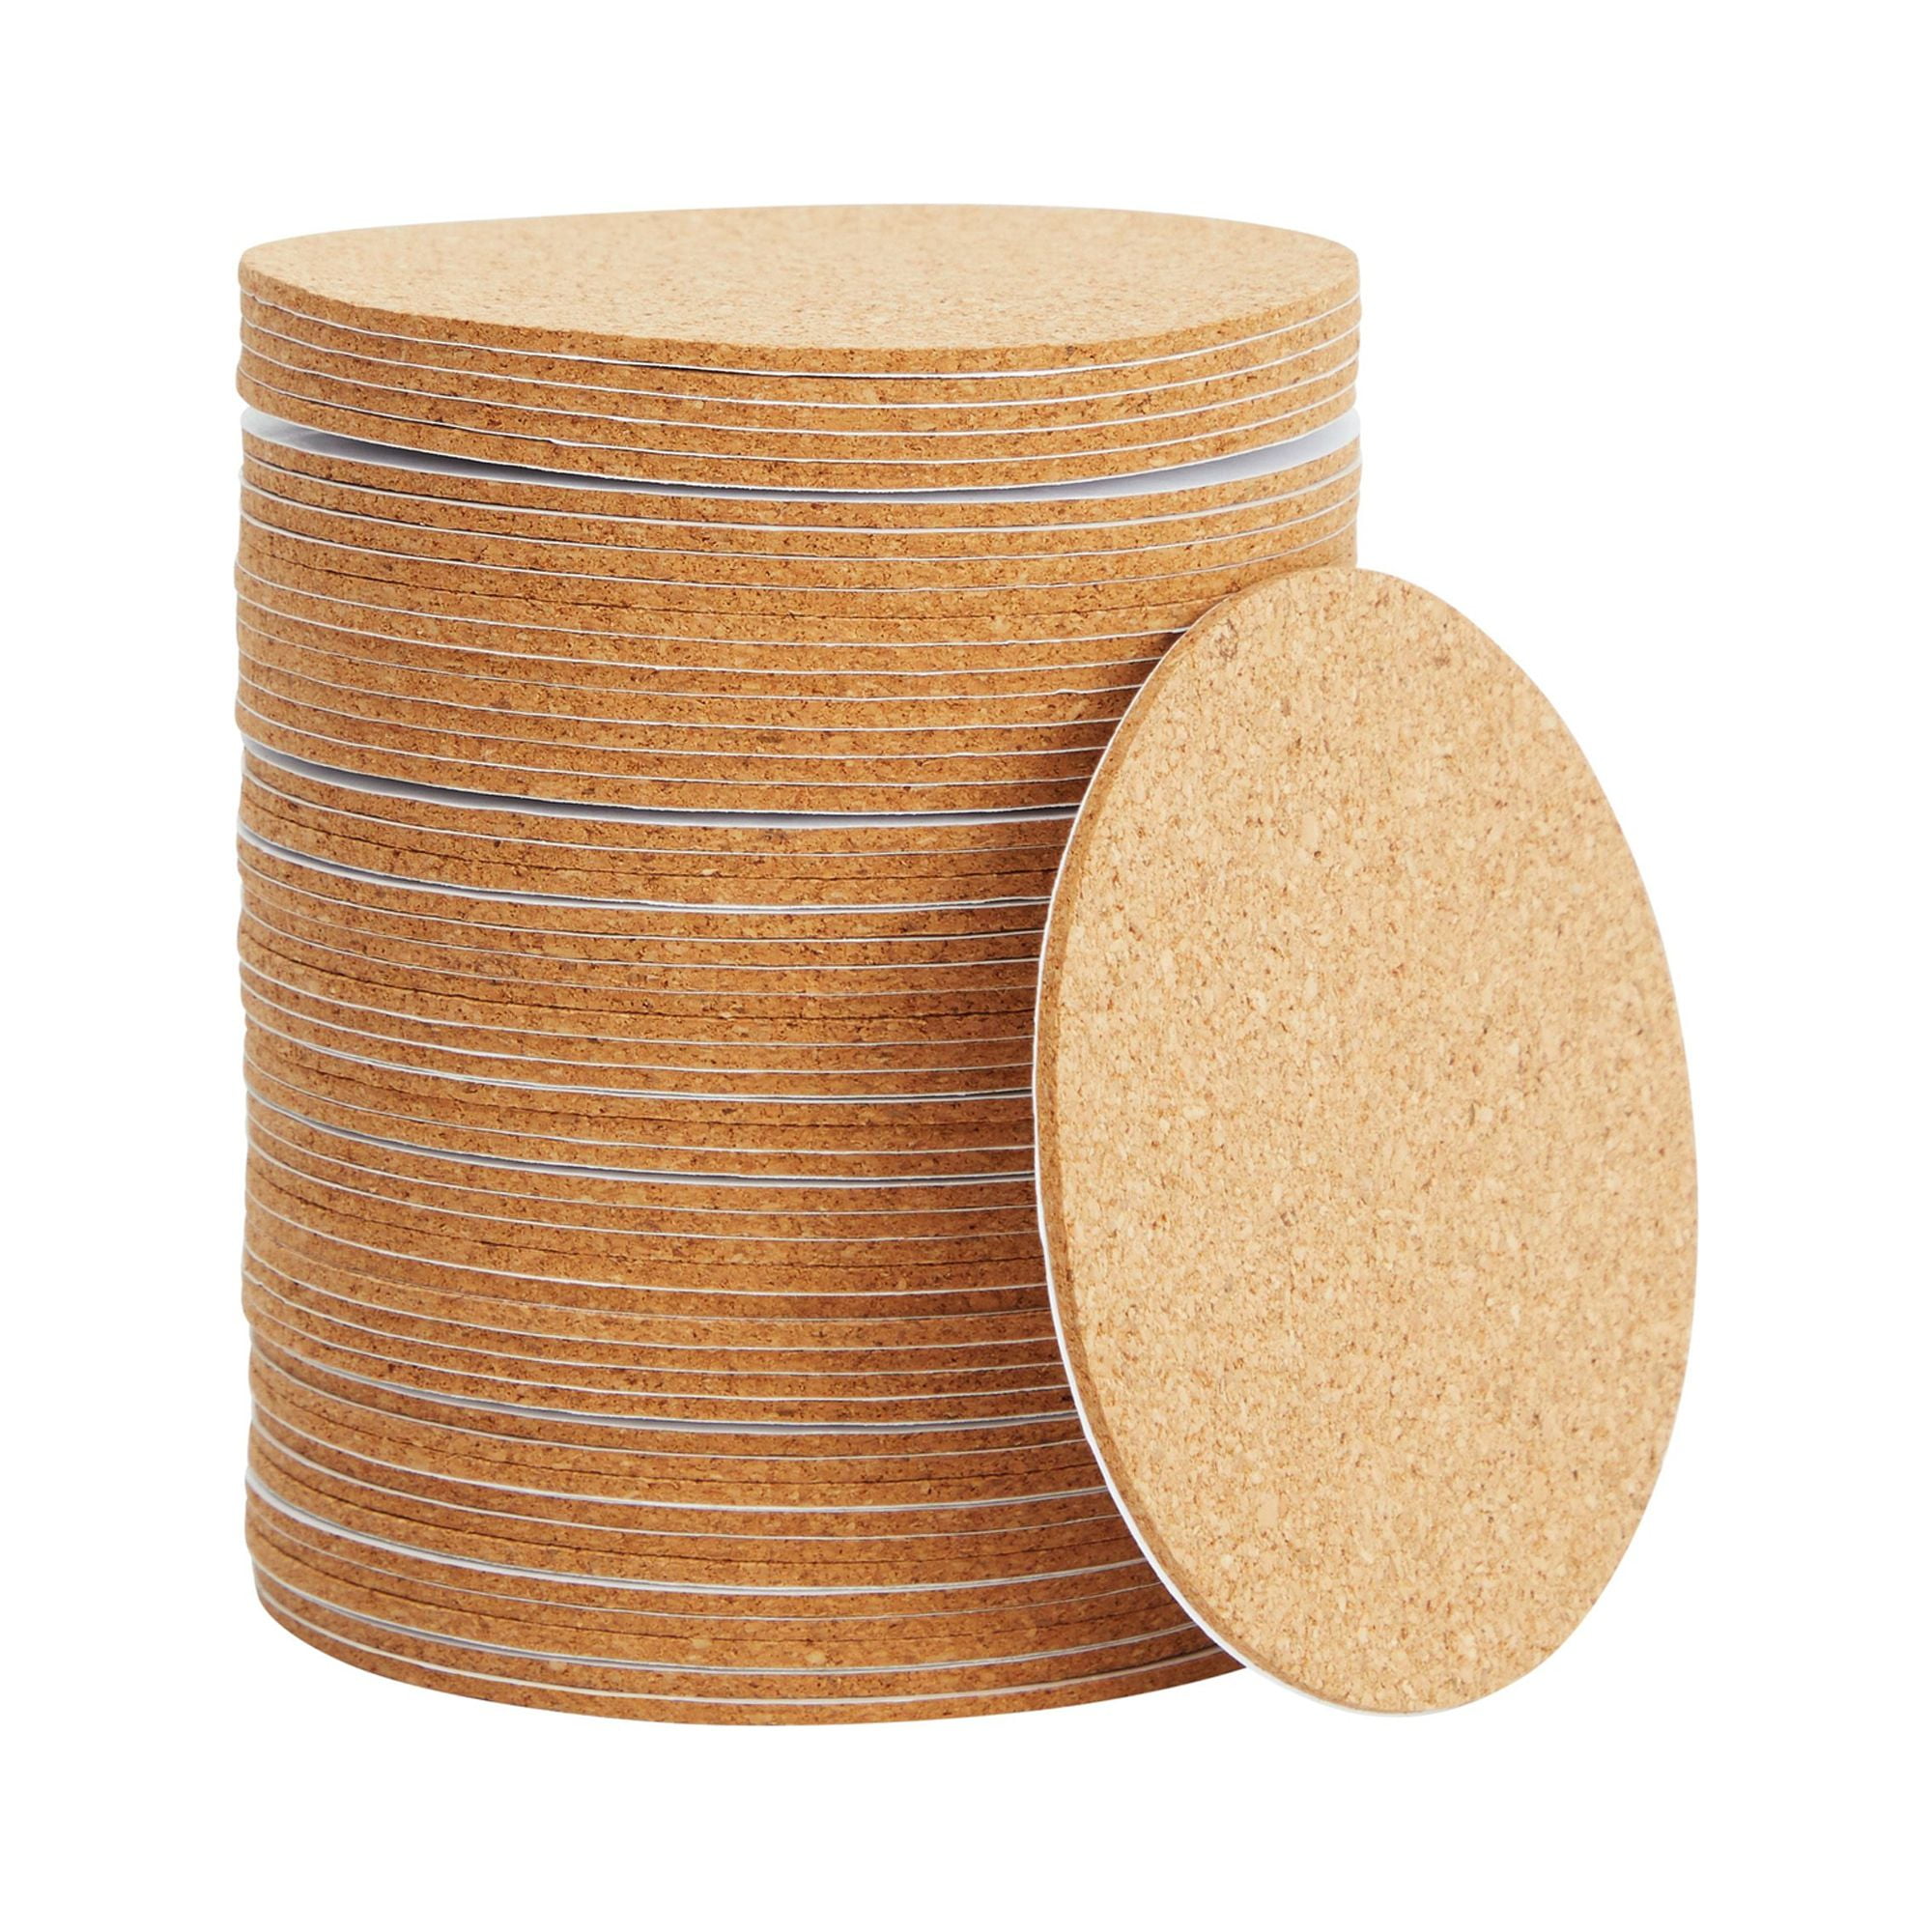  Set of 10 Cork Coaster with Adhesive Liner Back. 3.5 Square or  3 Round Cork for DIY Coaster, Craft, Furniture Feet, Cork for Succulent  (Round 3) : Home & Kitchen